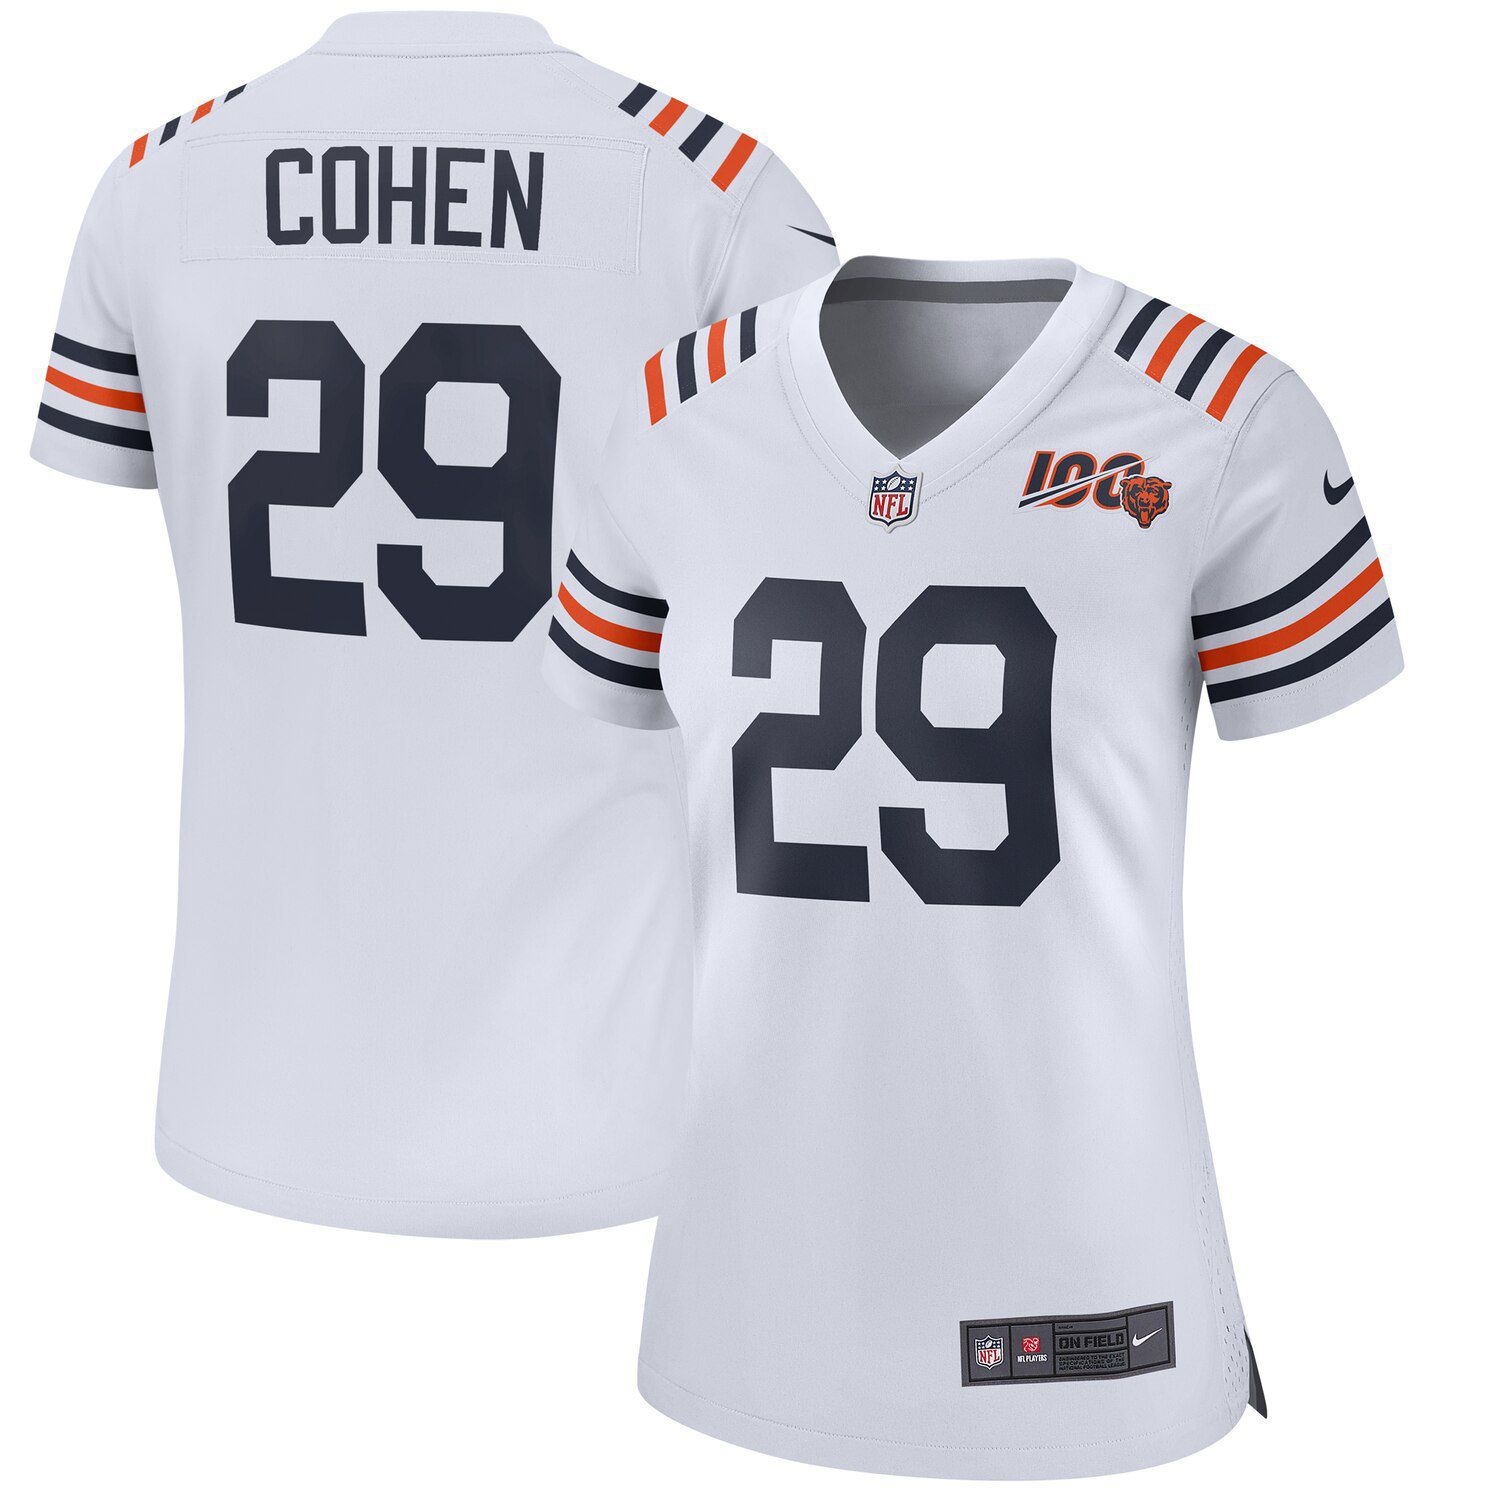 2019 chicago bears jersey